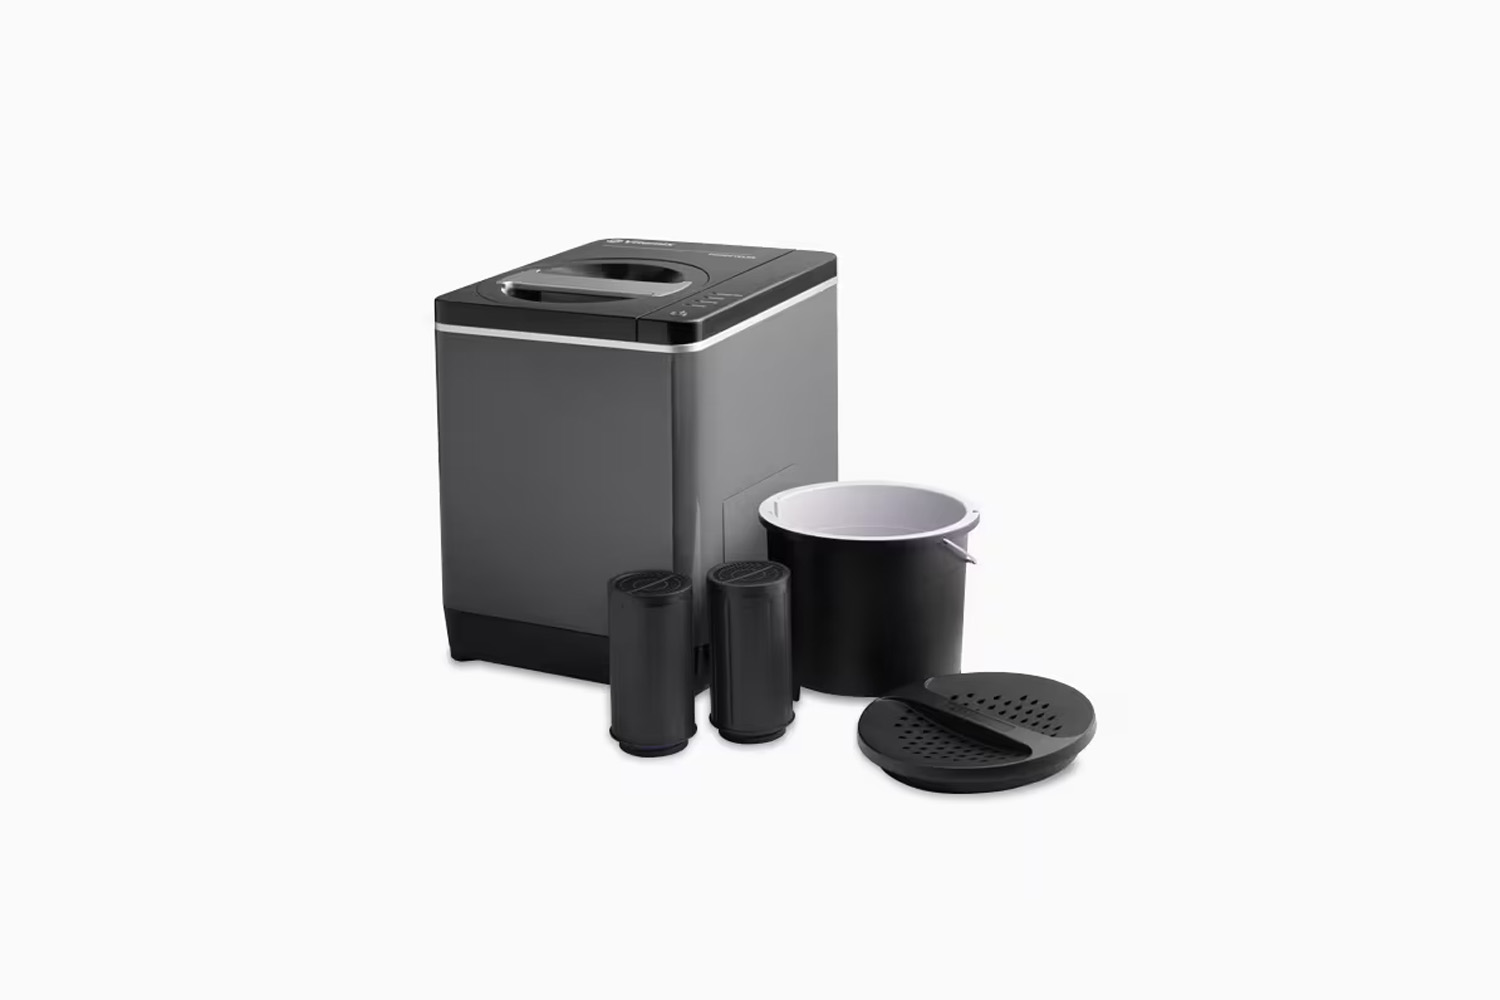 The revolutionary Vitamix FoodCycler FC-50. Fill with food scraps following prep and meals and the FoodCycler transforms food scraps into fertilizer directly. Contact Vitamix for more information.